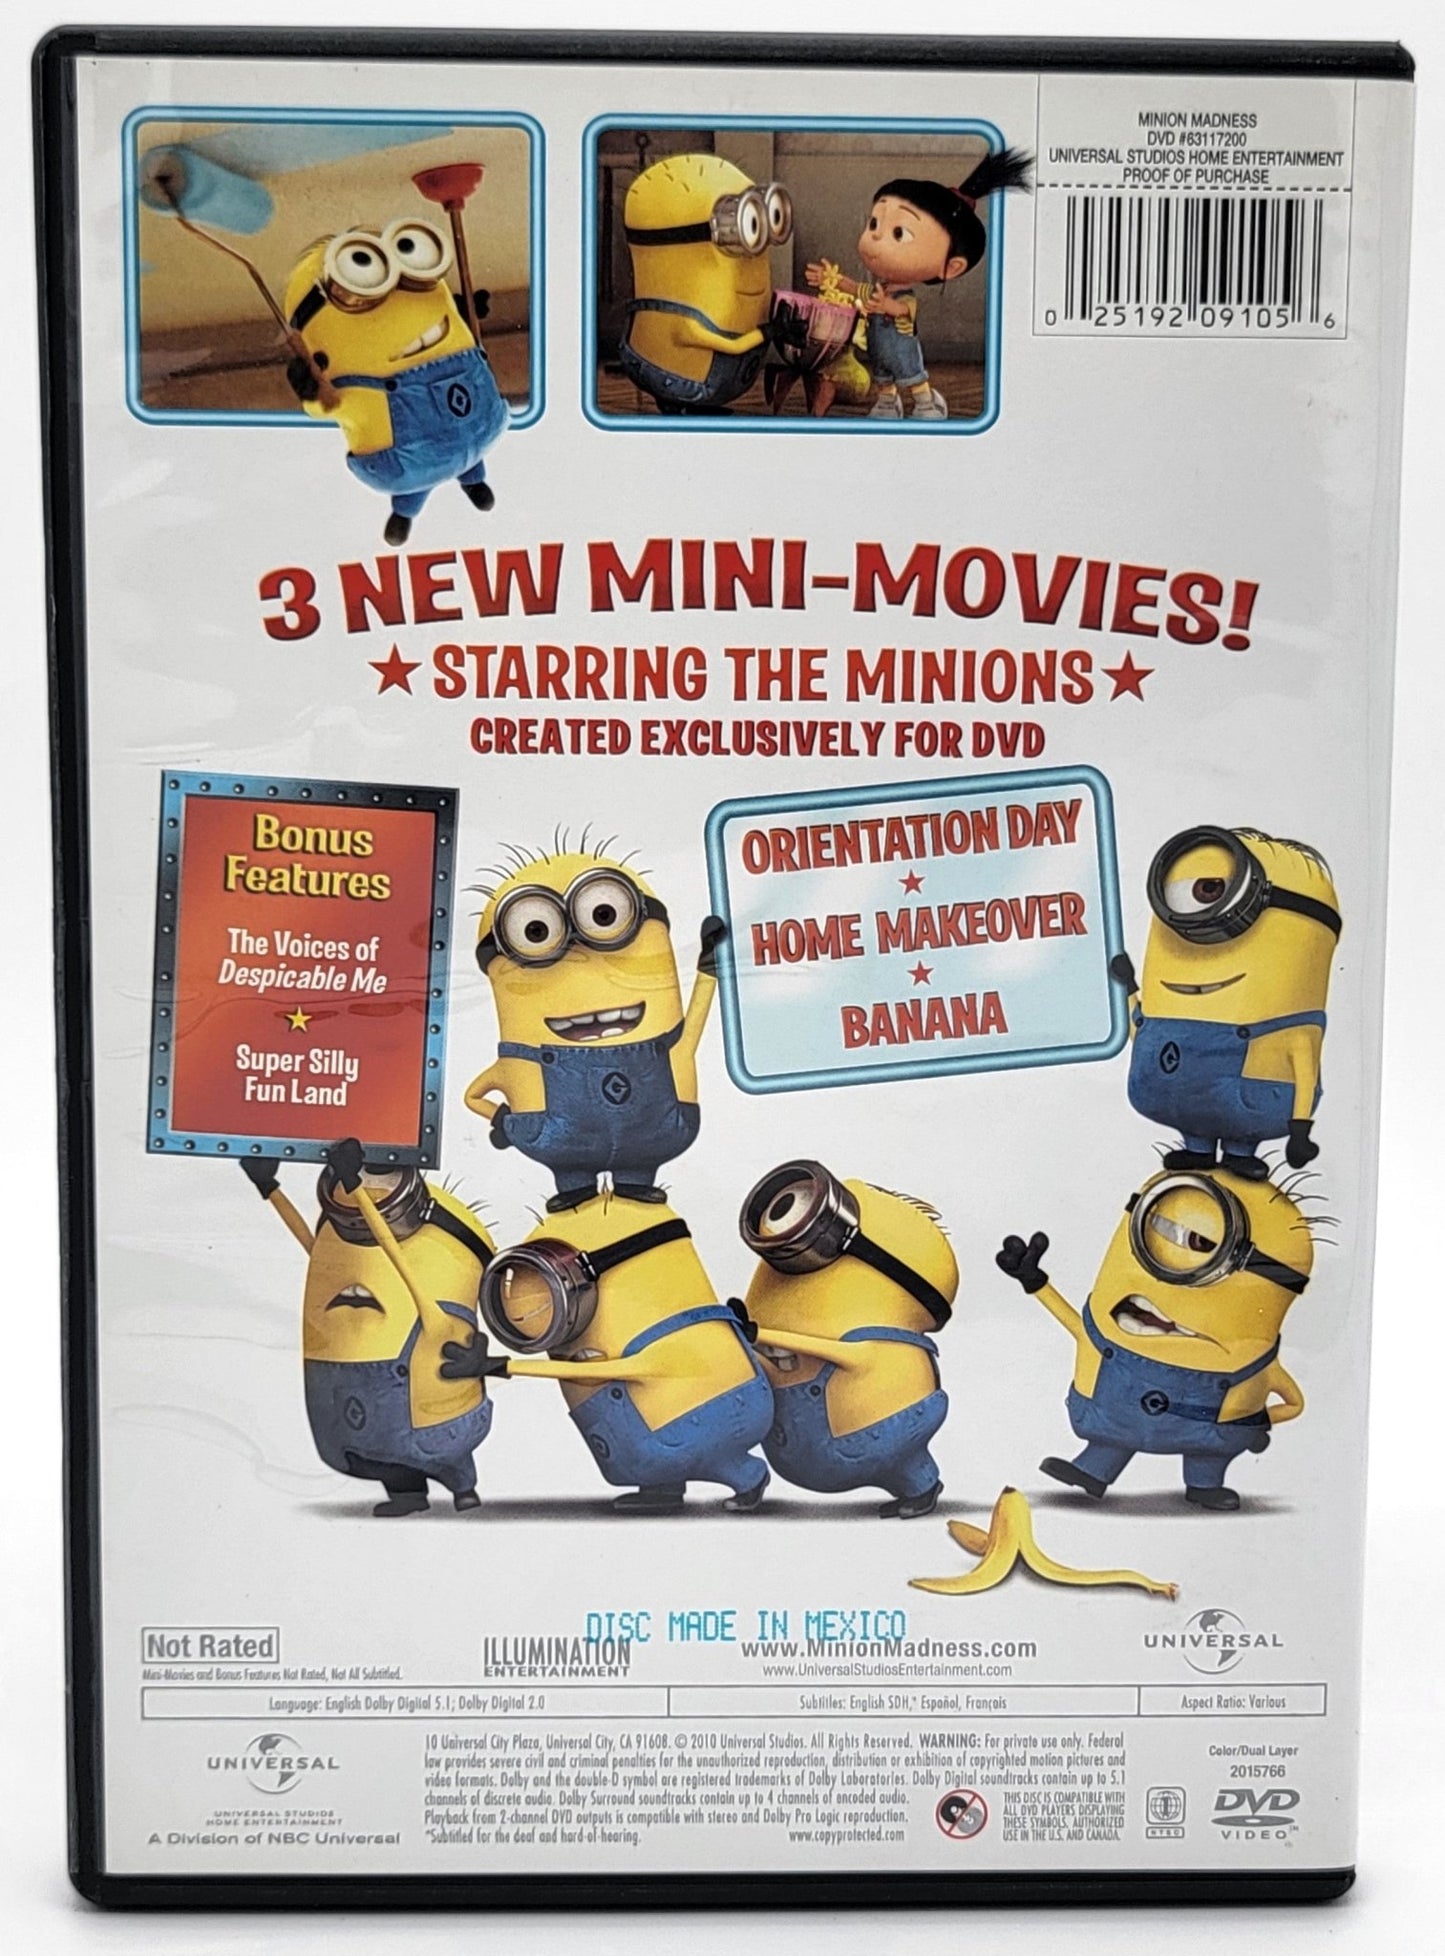 Universal Studios Home Entertainment - Despicable Me Presents Minion Madness | DVD | 3 New Mini Movies - DVD - Steady Bunny Shop